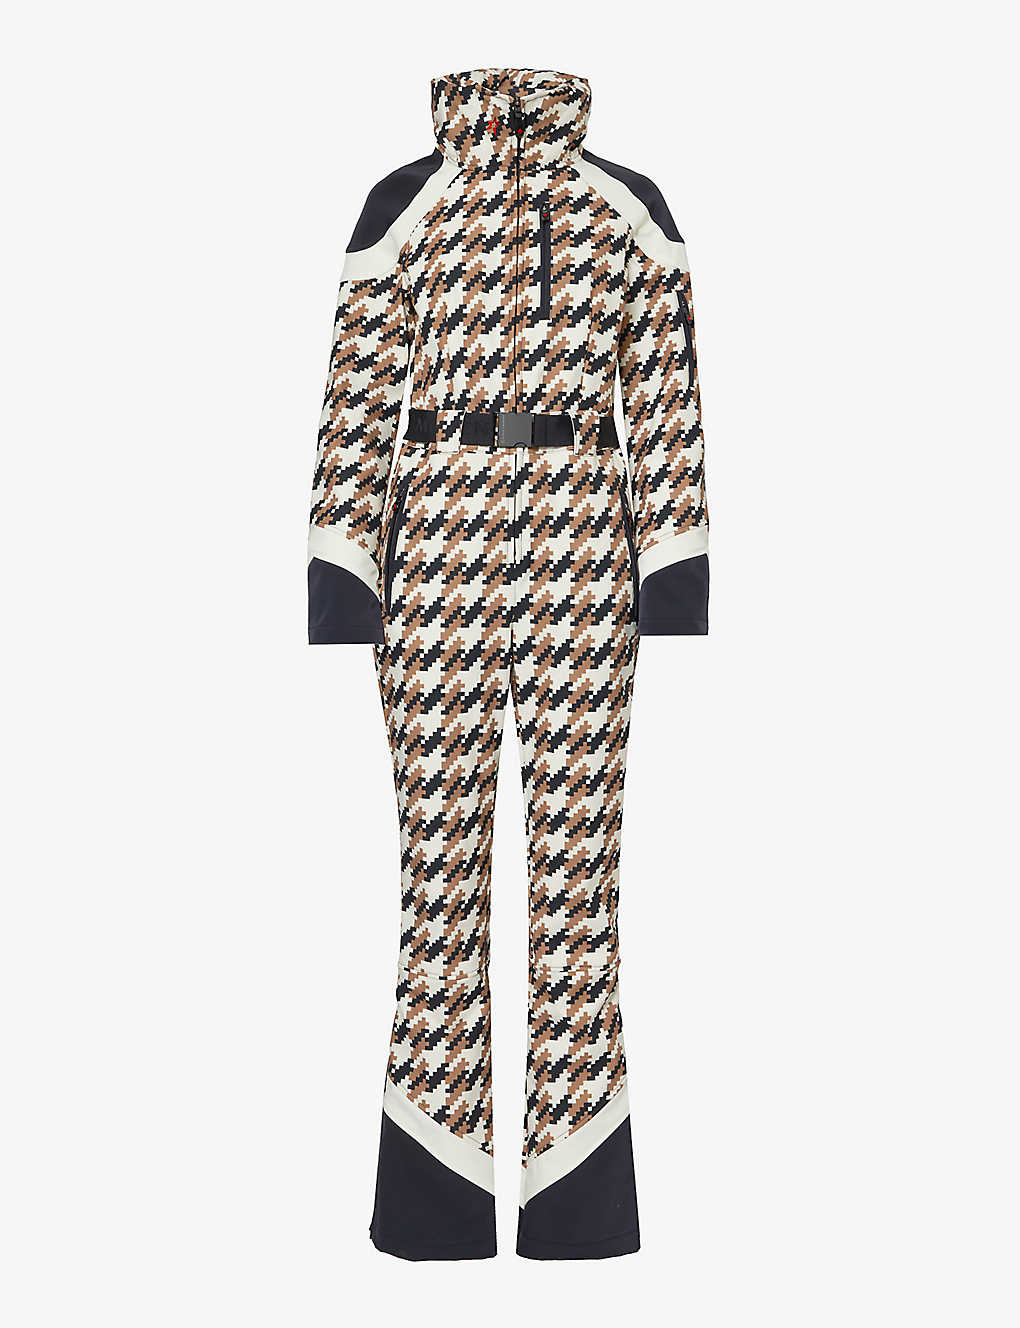 Shop Perfect Moment Womens Houndstooth Iconic Camel Allos Houndstooth-checked Ski Suit